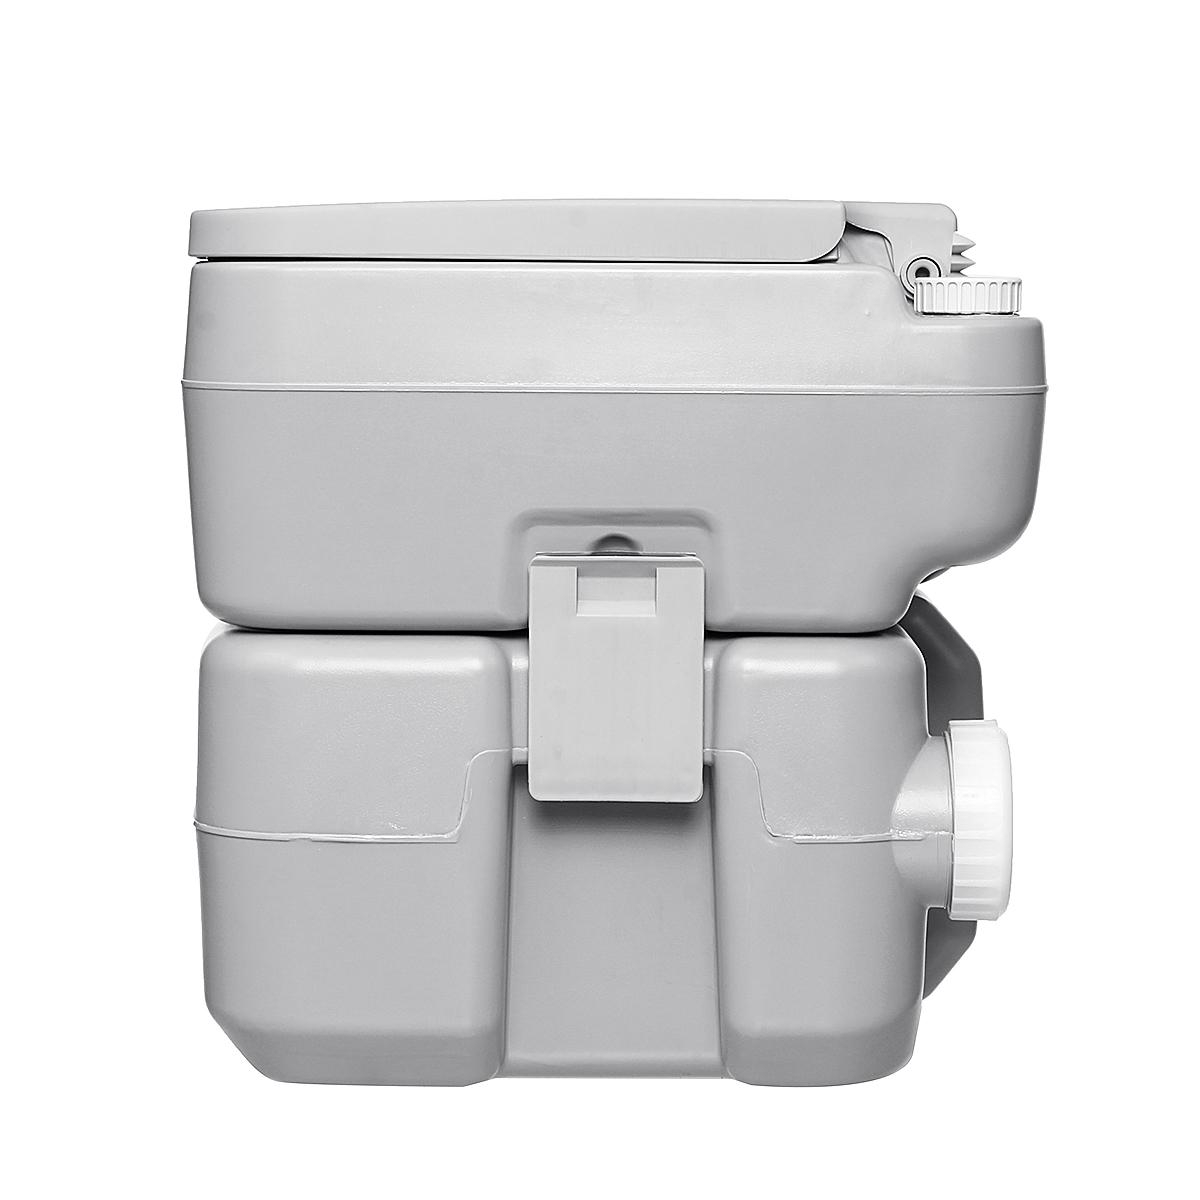 20L Portable Toilet Flush Mobile Outdoor Camping Handle 2 Spary Nozzle WC Tent Hiking Hygiene Sanitation Equipment for Caravan Travel Camping Boat - Auto GoShop